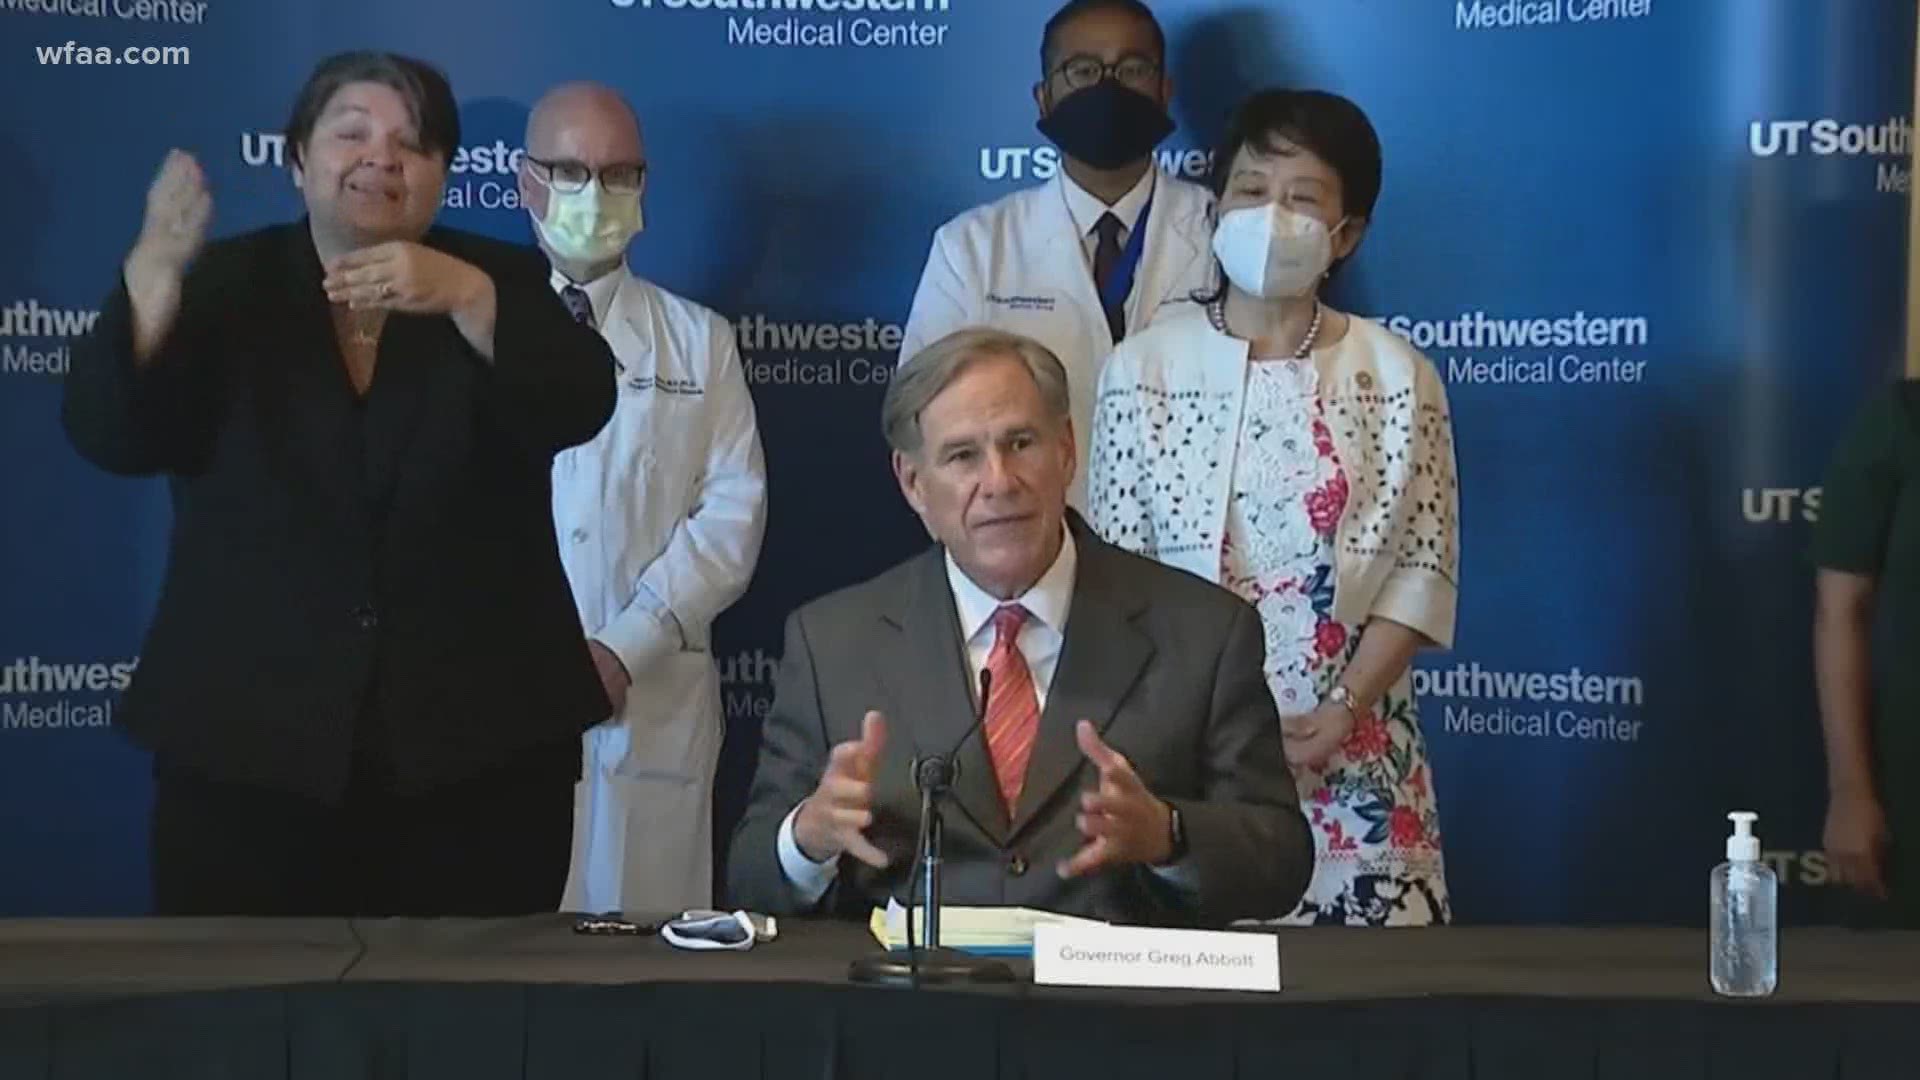 The Texas governor said that though daily new coronavirus cases are dropping in Dallas-Fort Worth, people should continue to exercise caution.